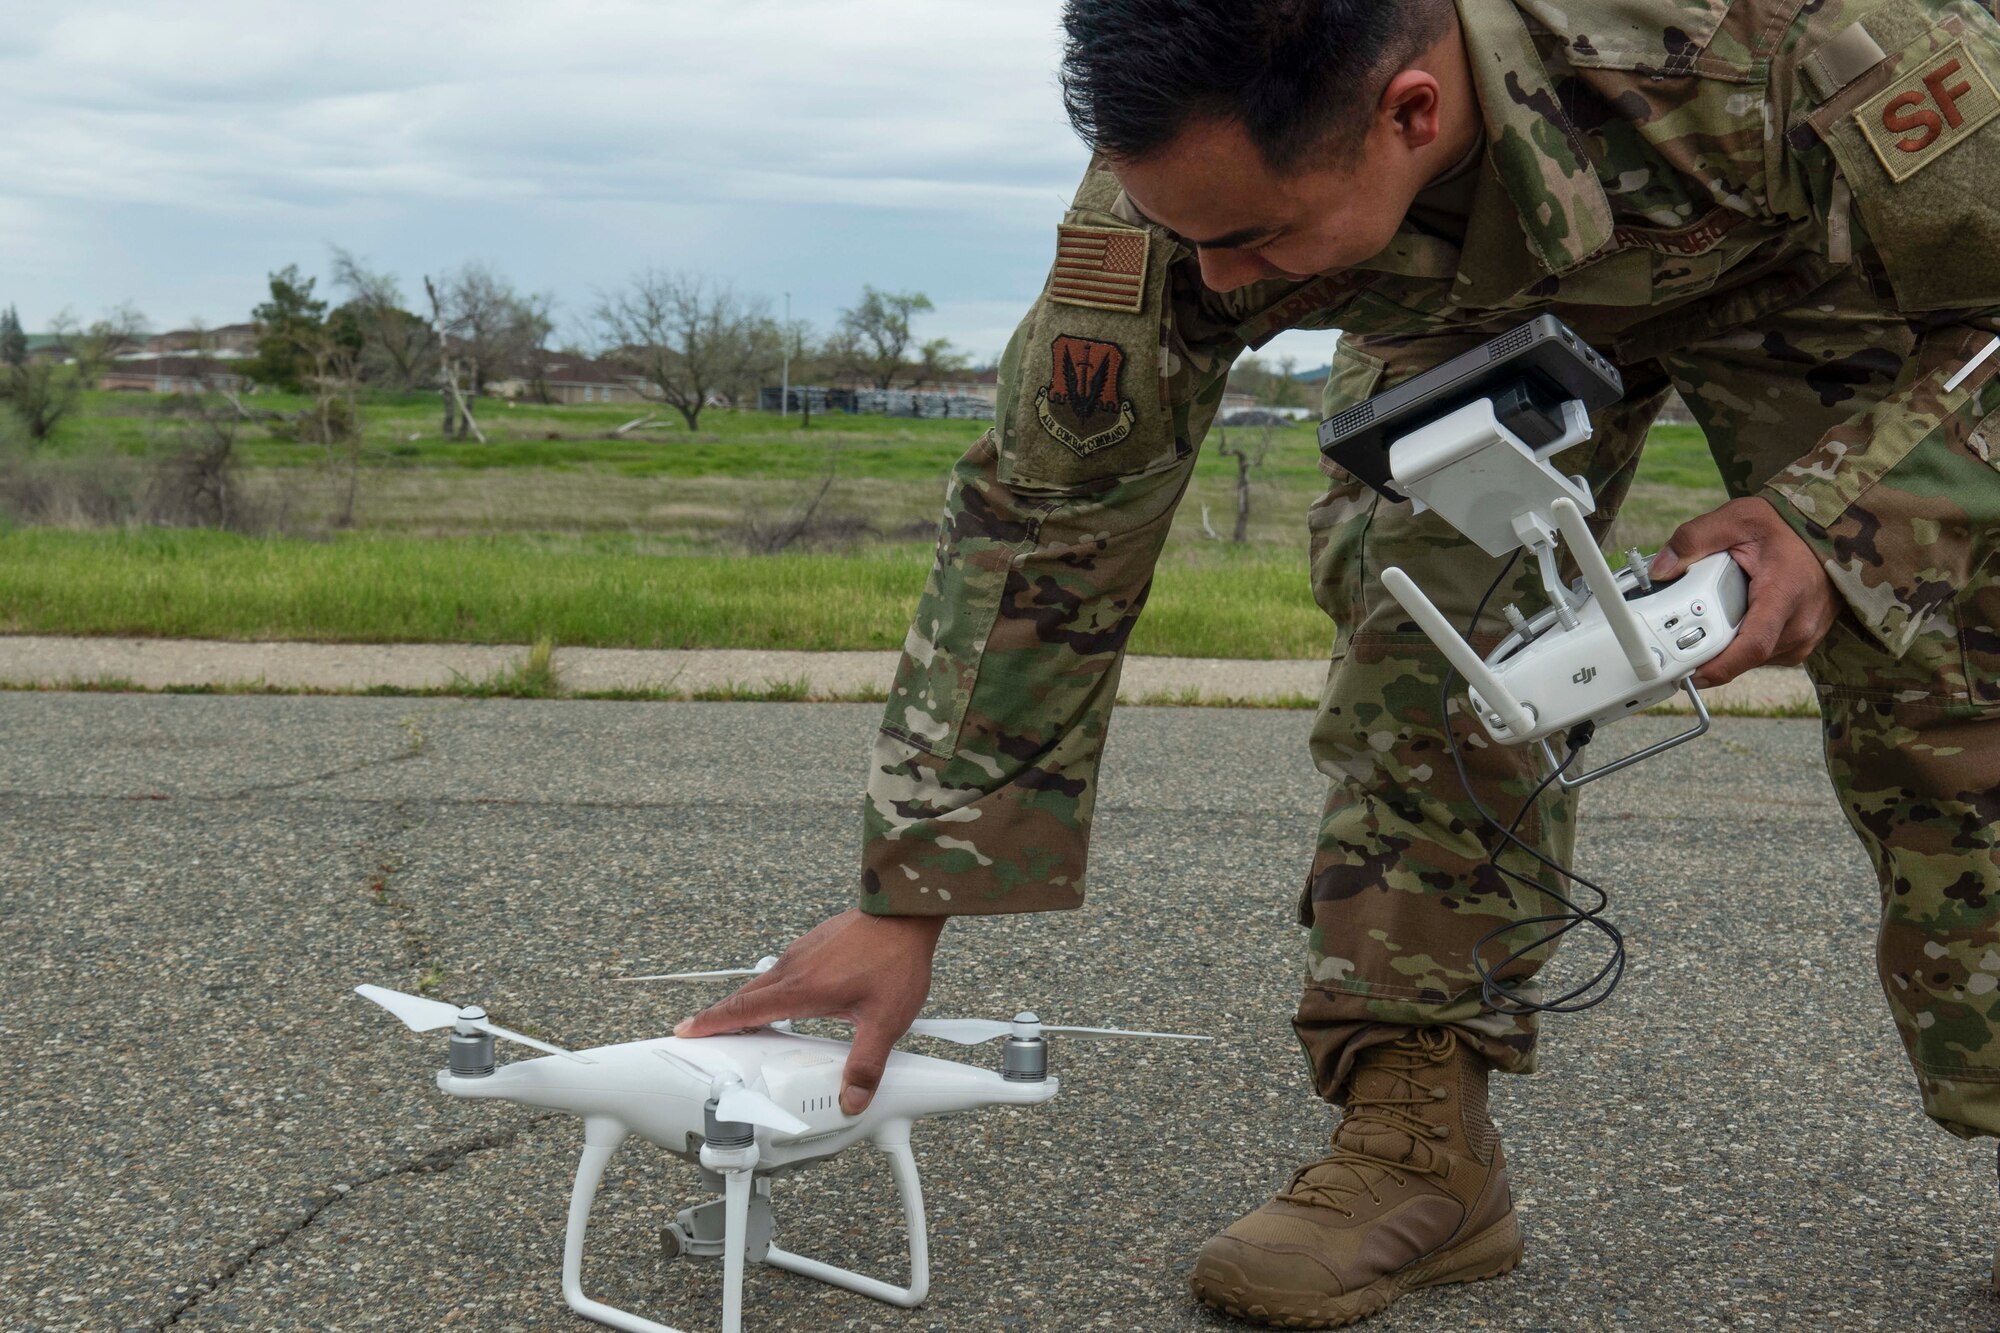 U.S. Air Force Staff Sgt. Staff Sgt. Francis Arnaldo, 9th Security Forces Squadron resource protection NCO in charge, prepares a drone while testing out the Hivemapper program capabilities at Beale Air Force Base, California, April 12, 2019. Beale members have partnered with the Hivemapper team since late 2018, to utilize the program as a way to same time, money, and manpower, while improving defense capabilities. (U.S. Air Force photo by Tech. Sgt. Veronica Montes)